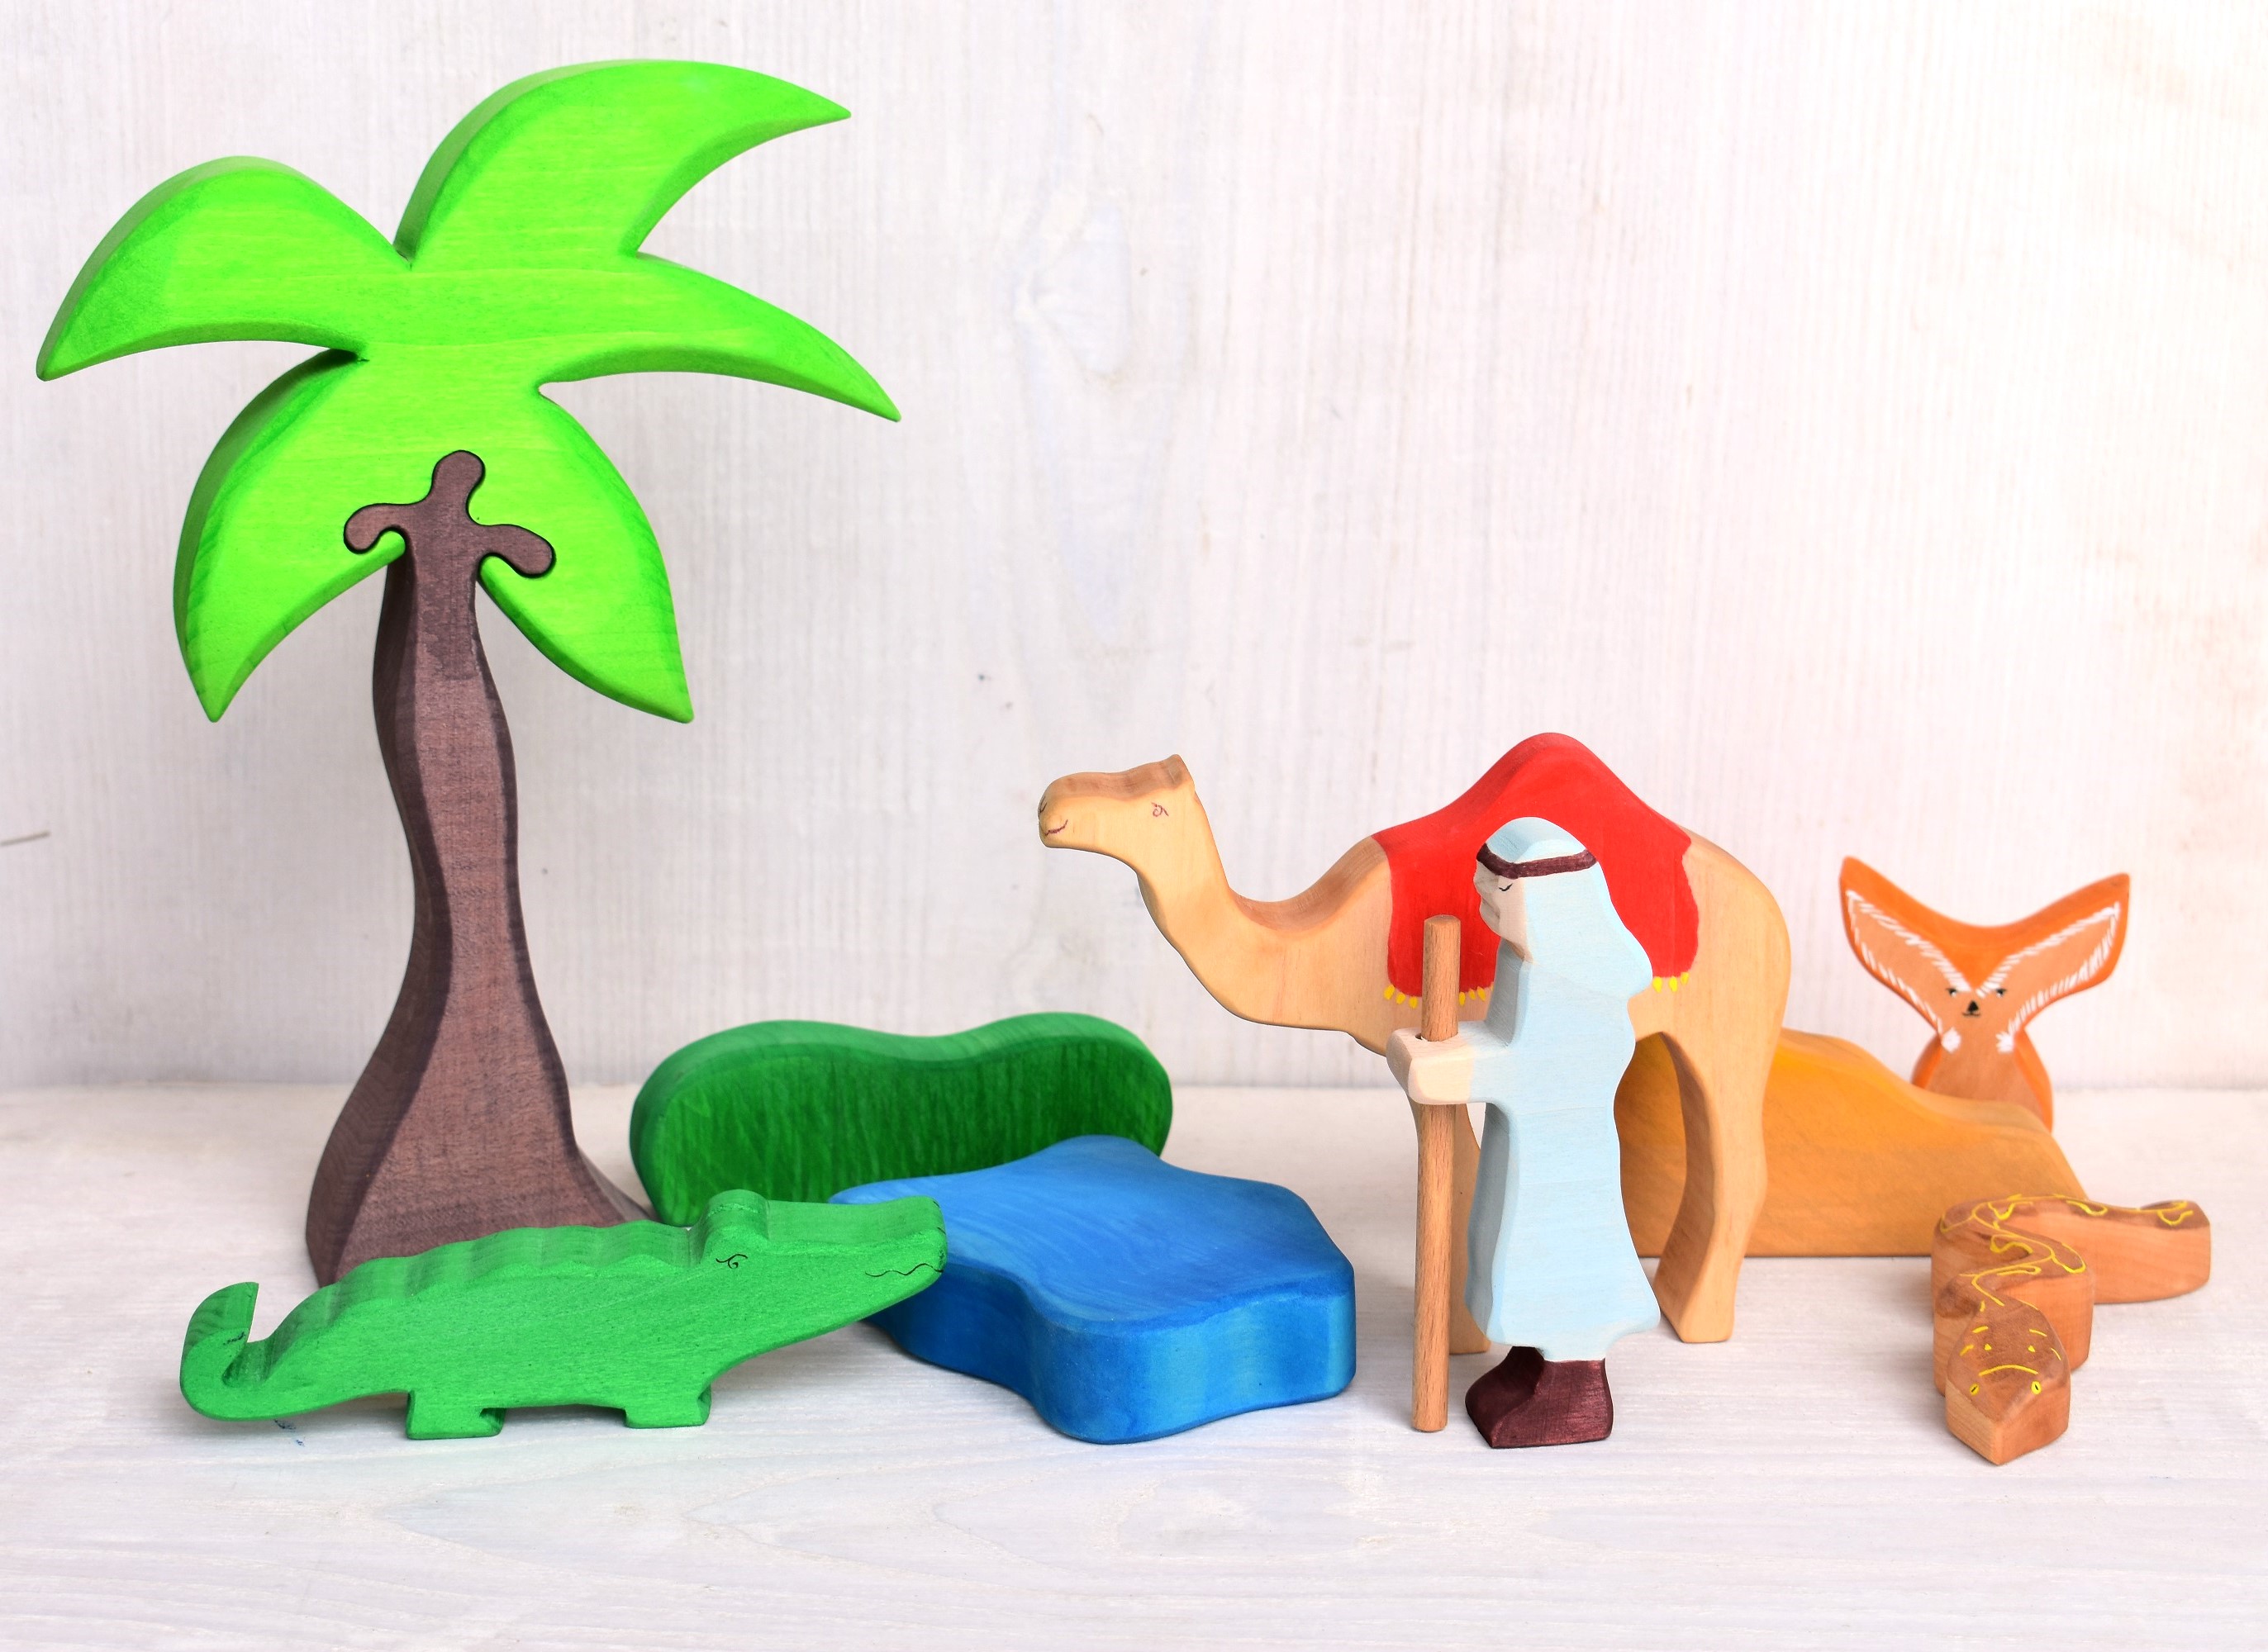 Wooden toy animals | Desert Oasis | Waldorf wooden toys - Vulps's Toys